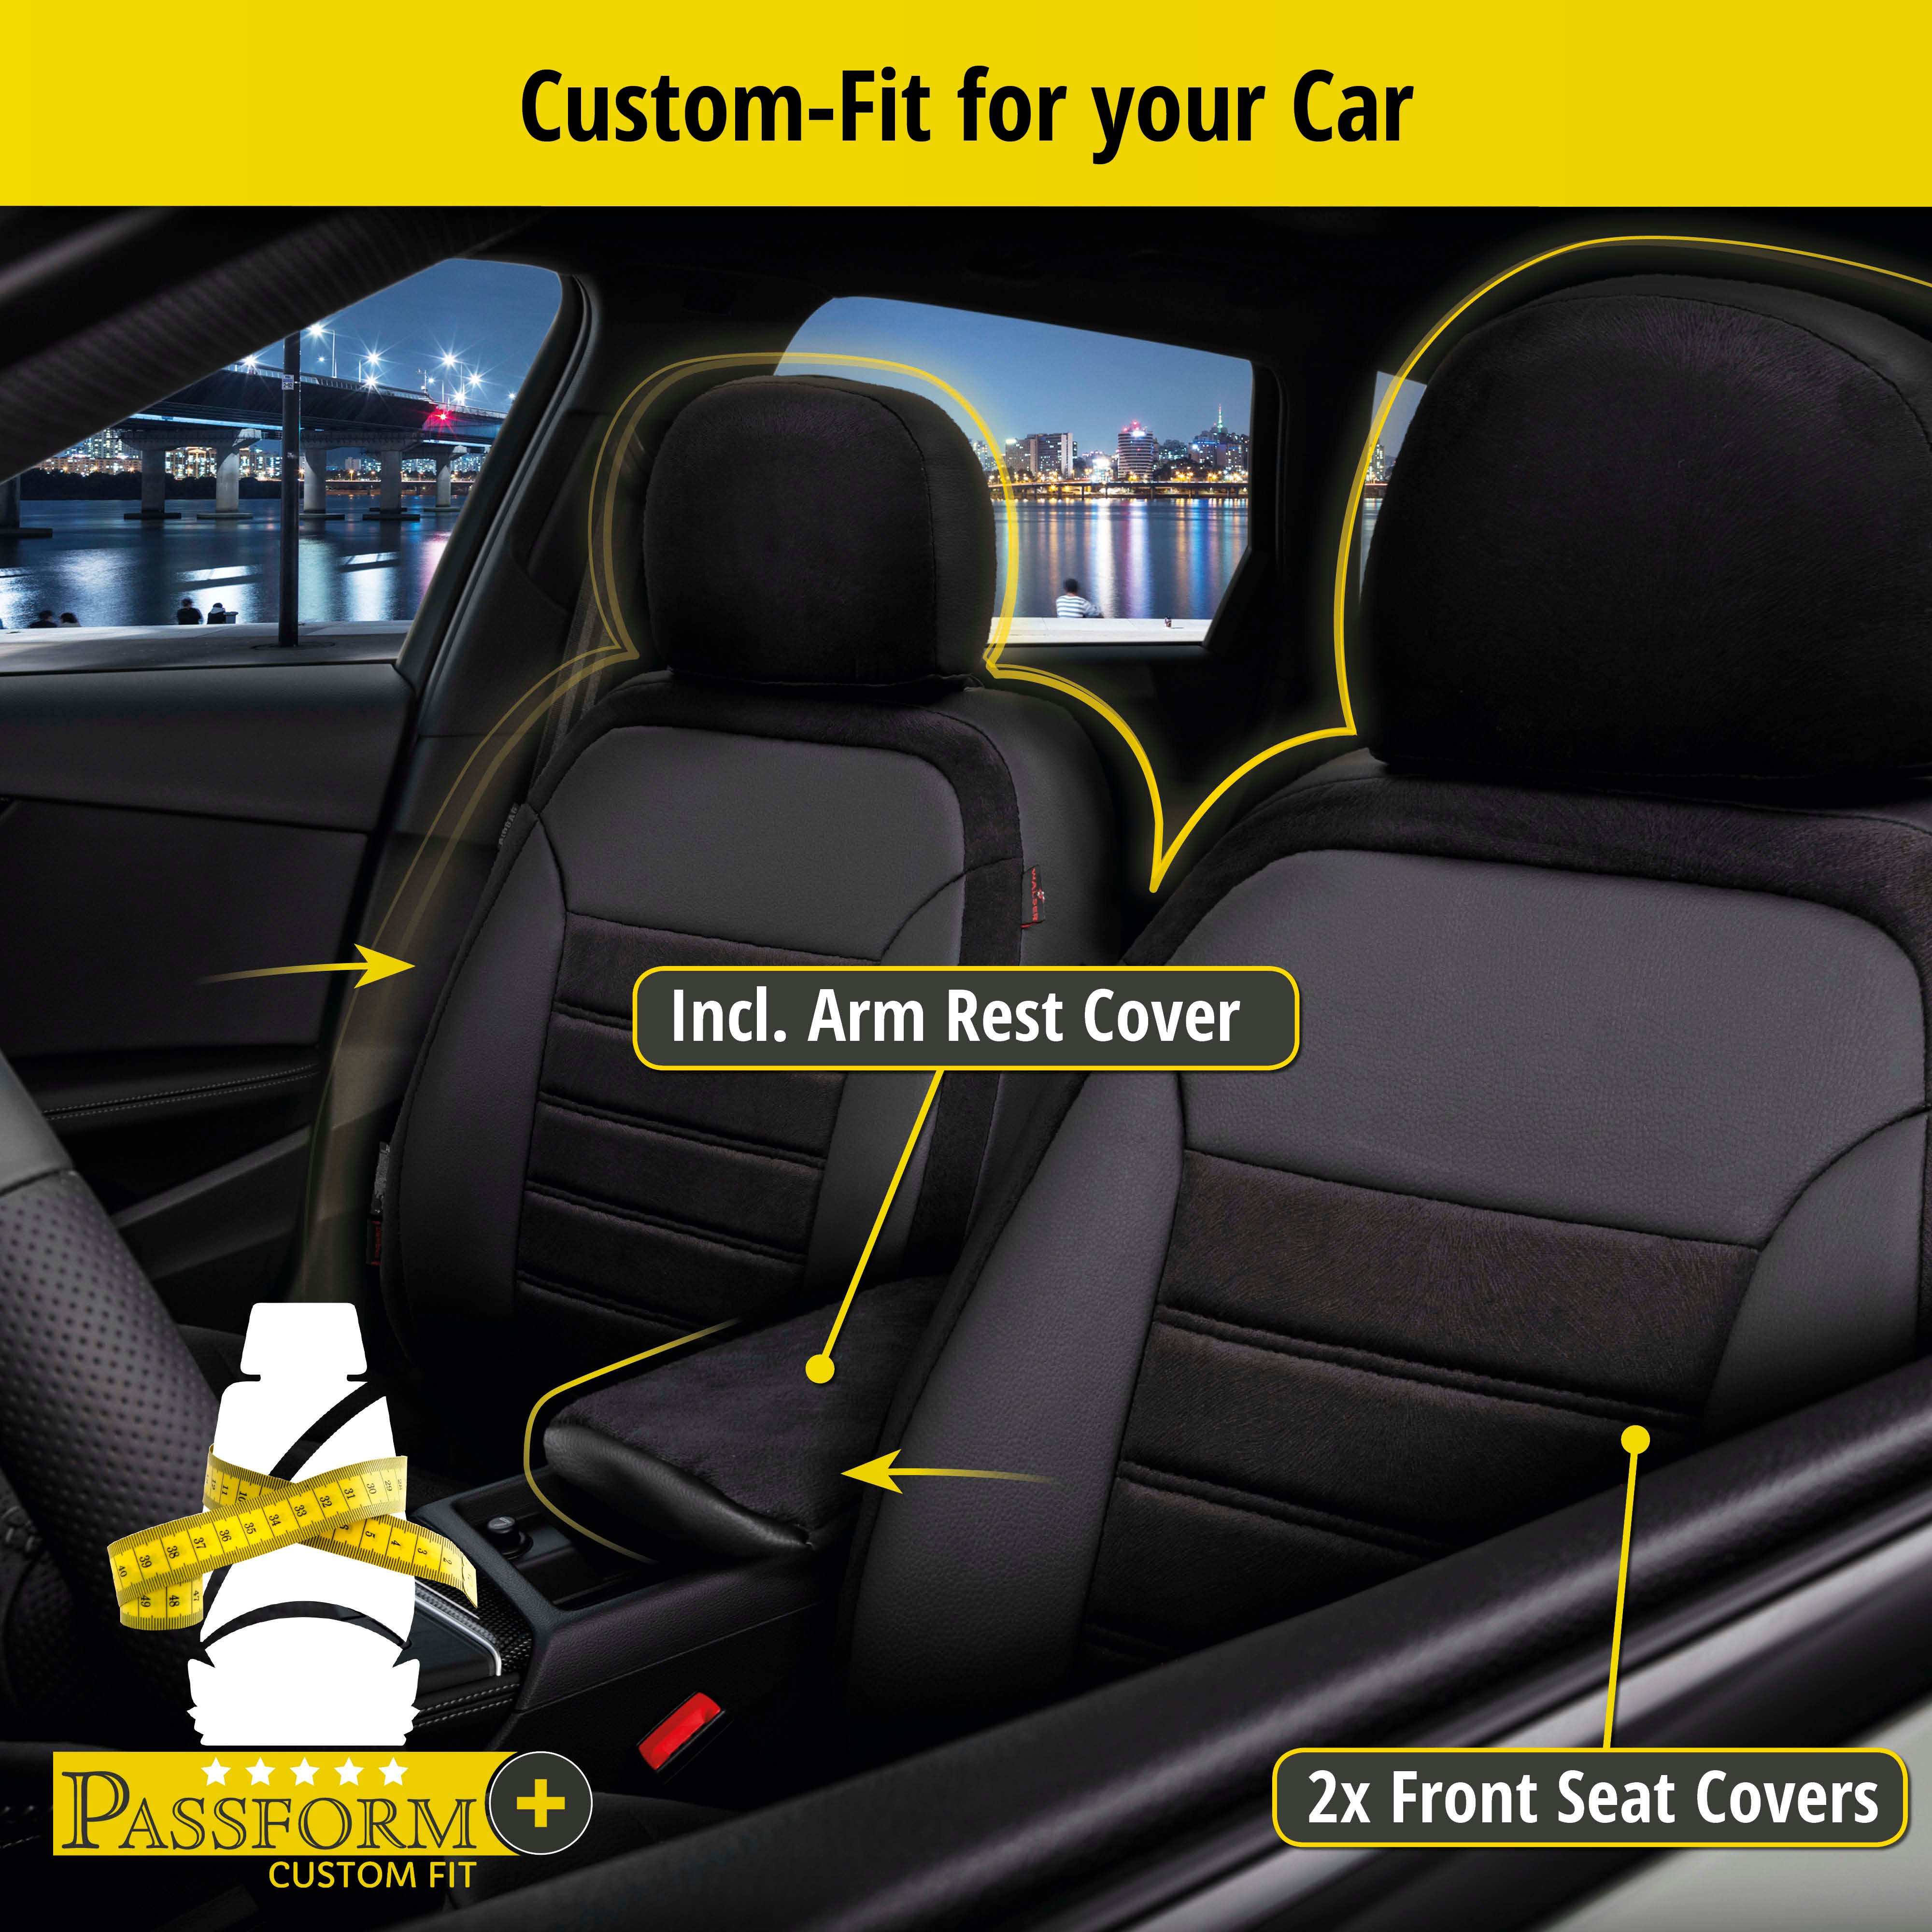 Seat Cover Bari for Fiat Panda/Panda Classic 09/2003-Today, 2 seat covers for normal seats